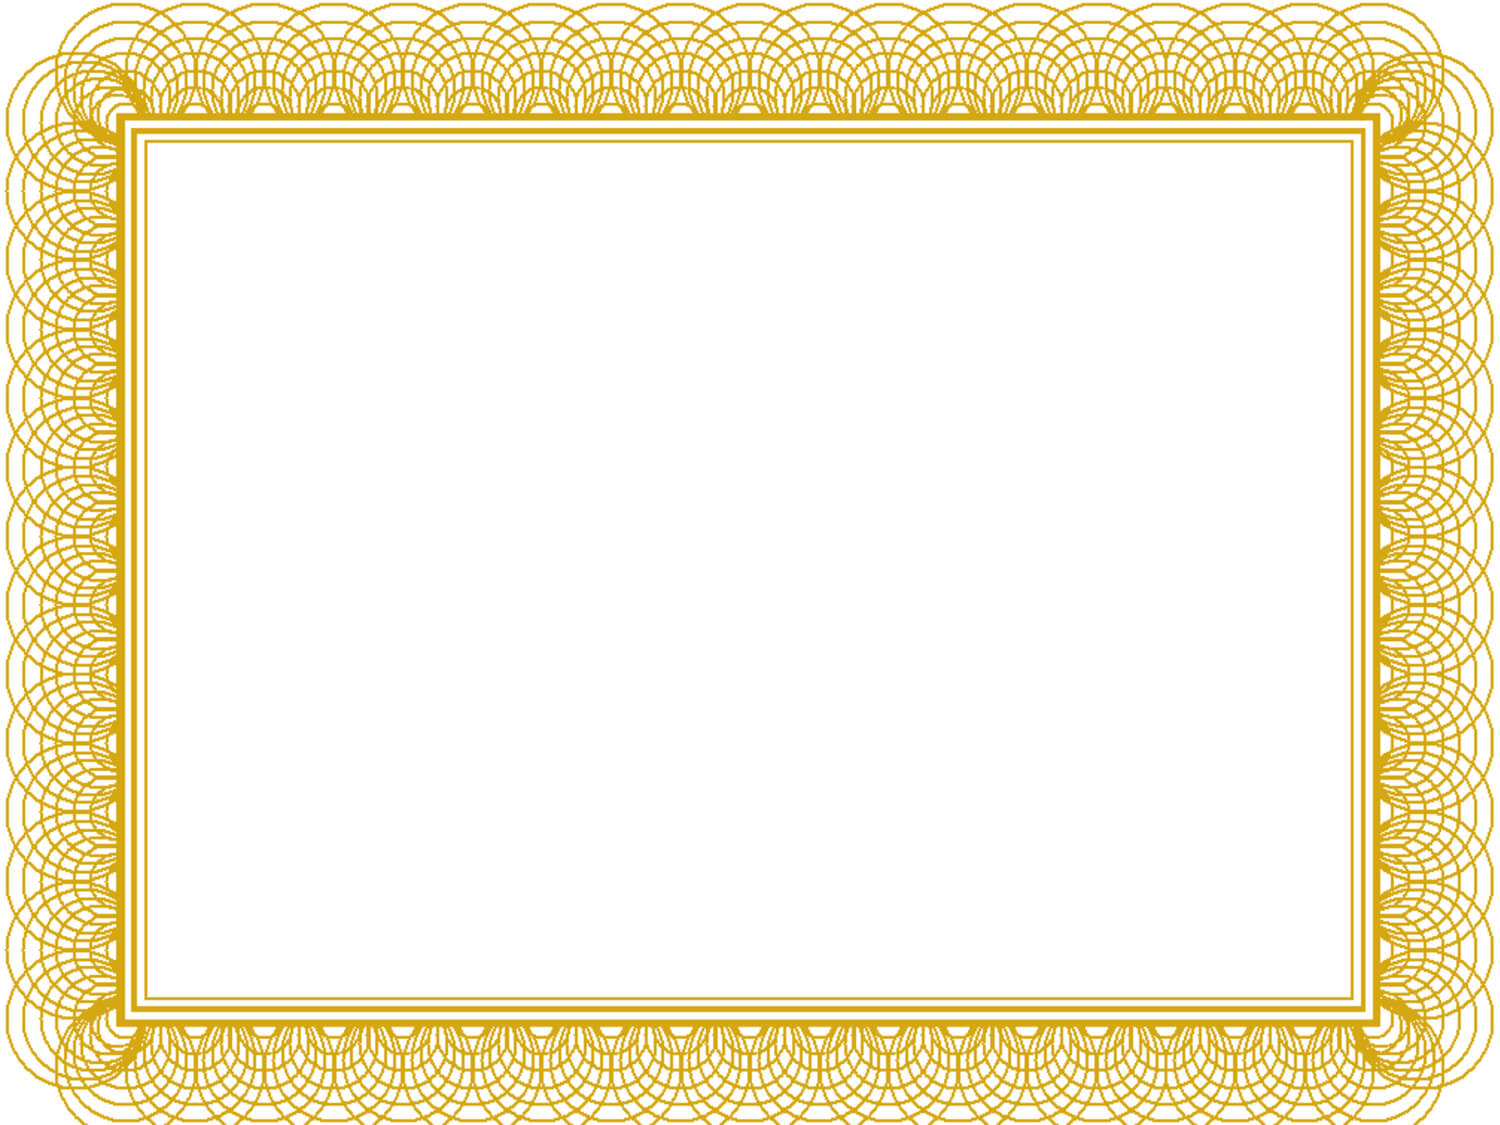 Printable Certificate Borders Calep midnightpig co Within Award 